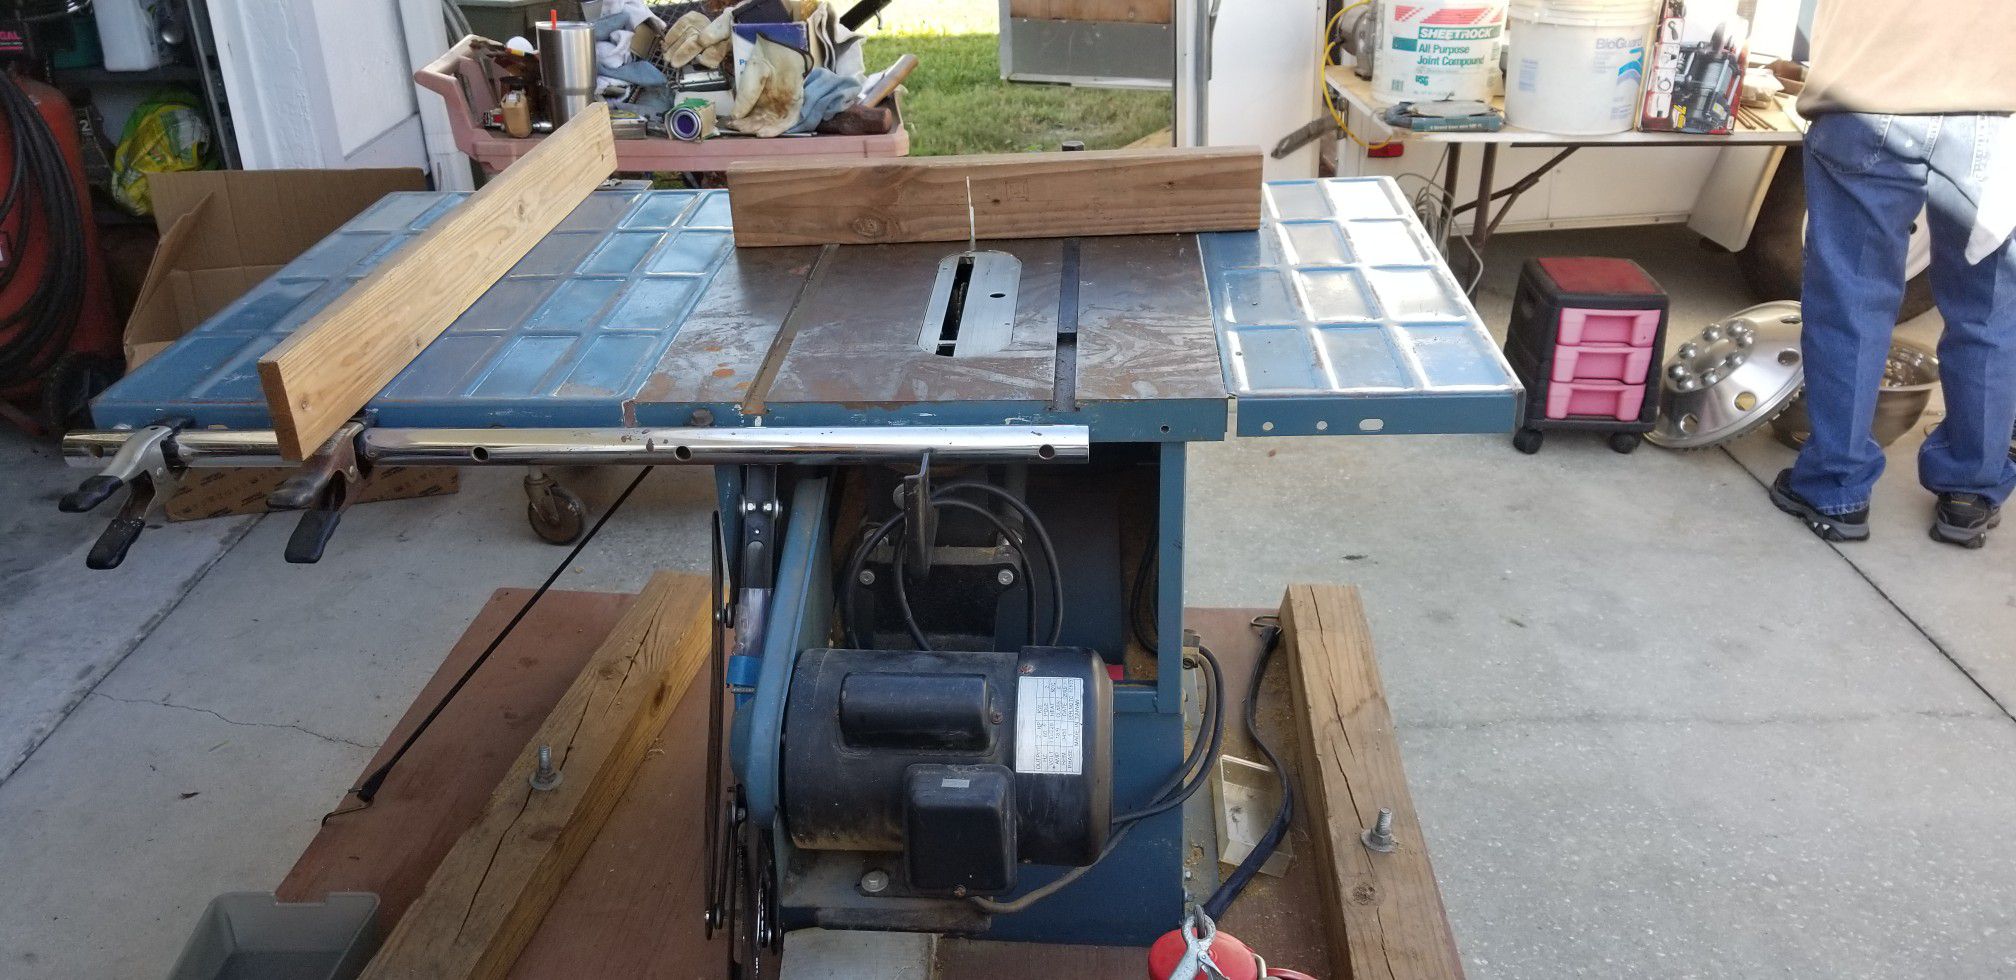 10" table saw In good condition